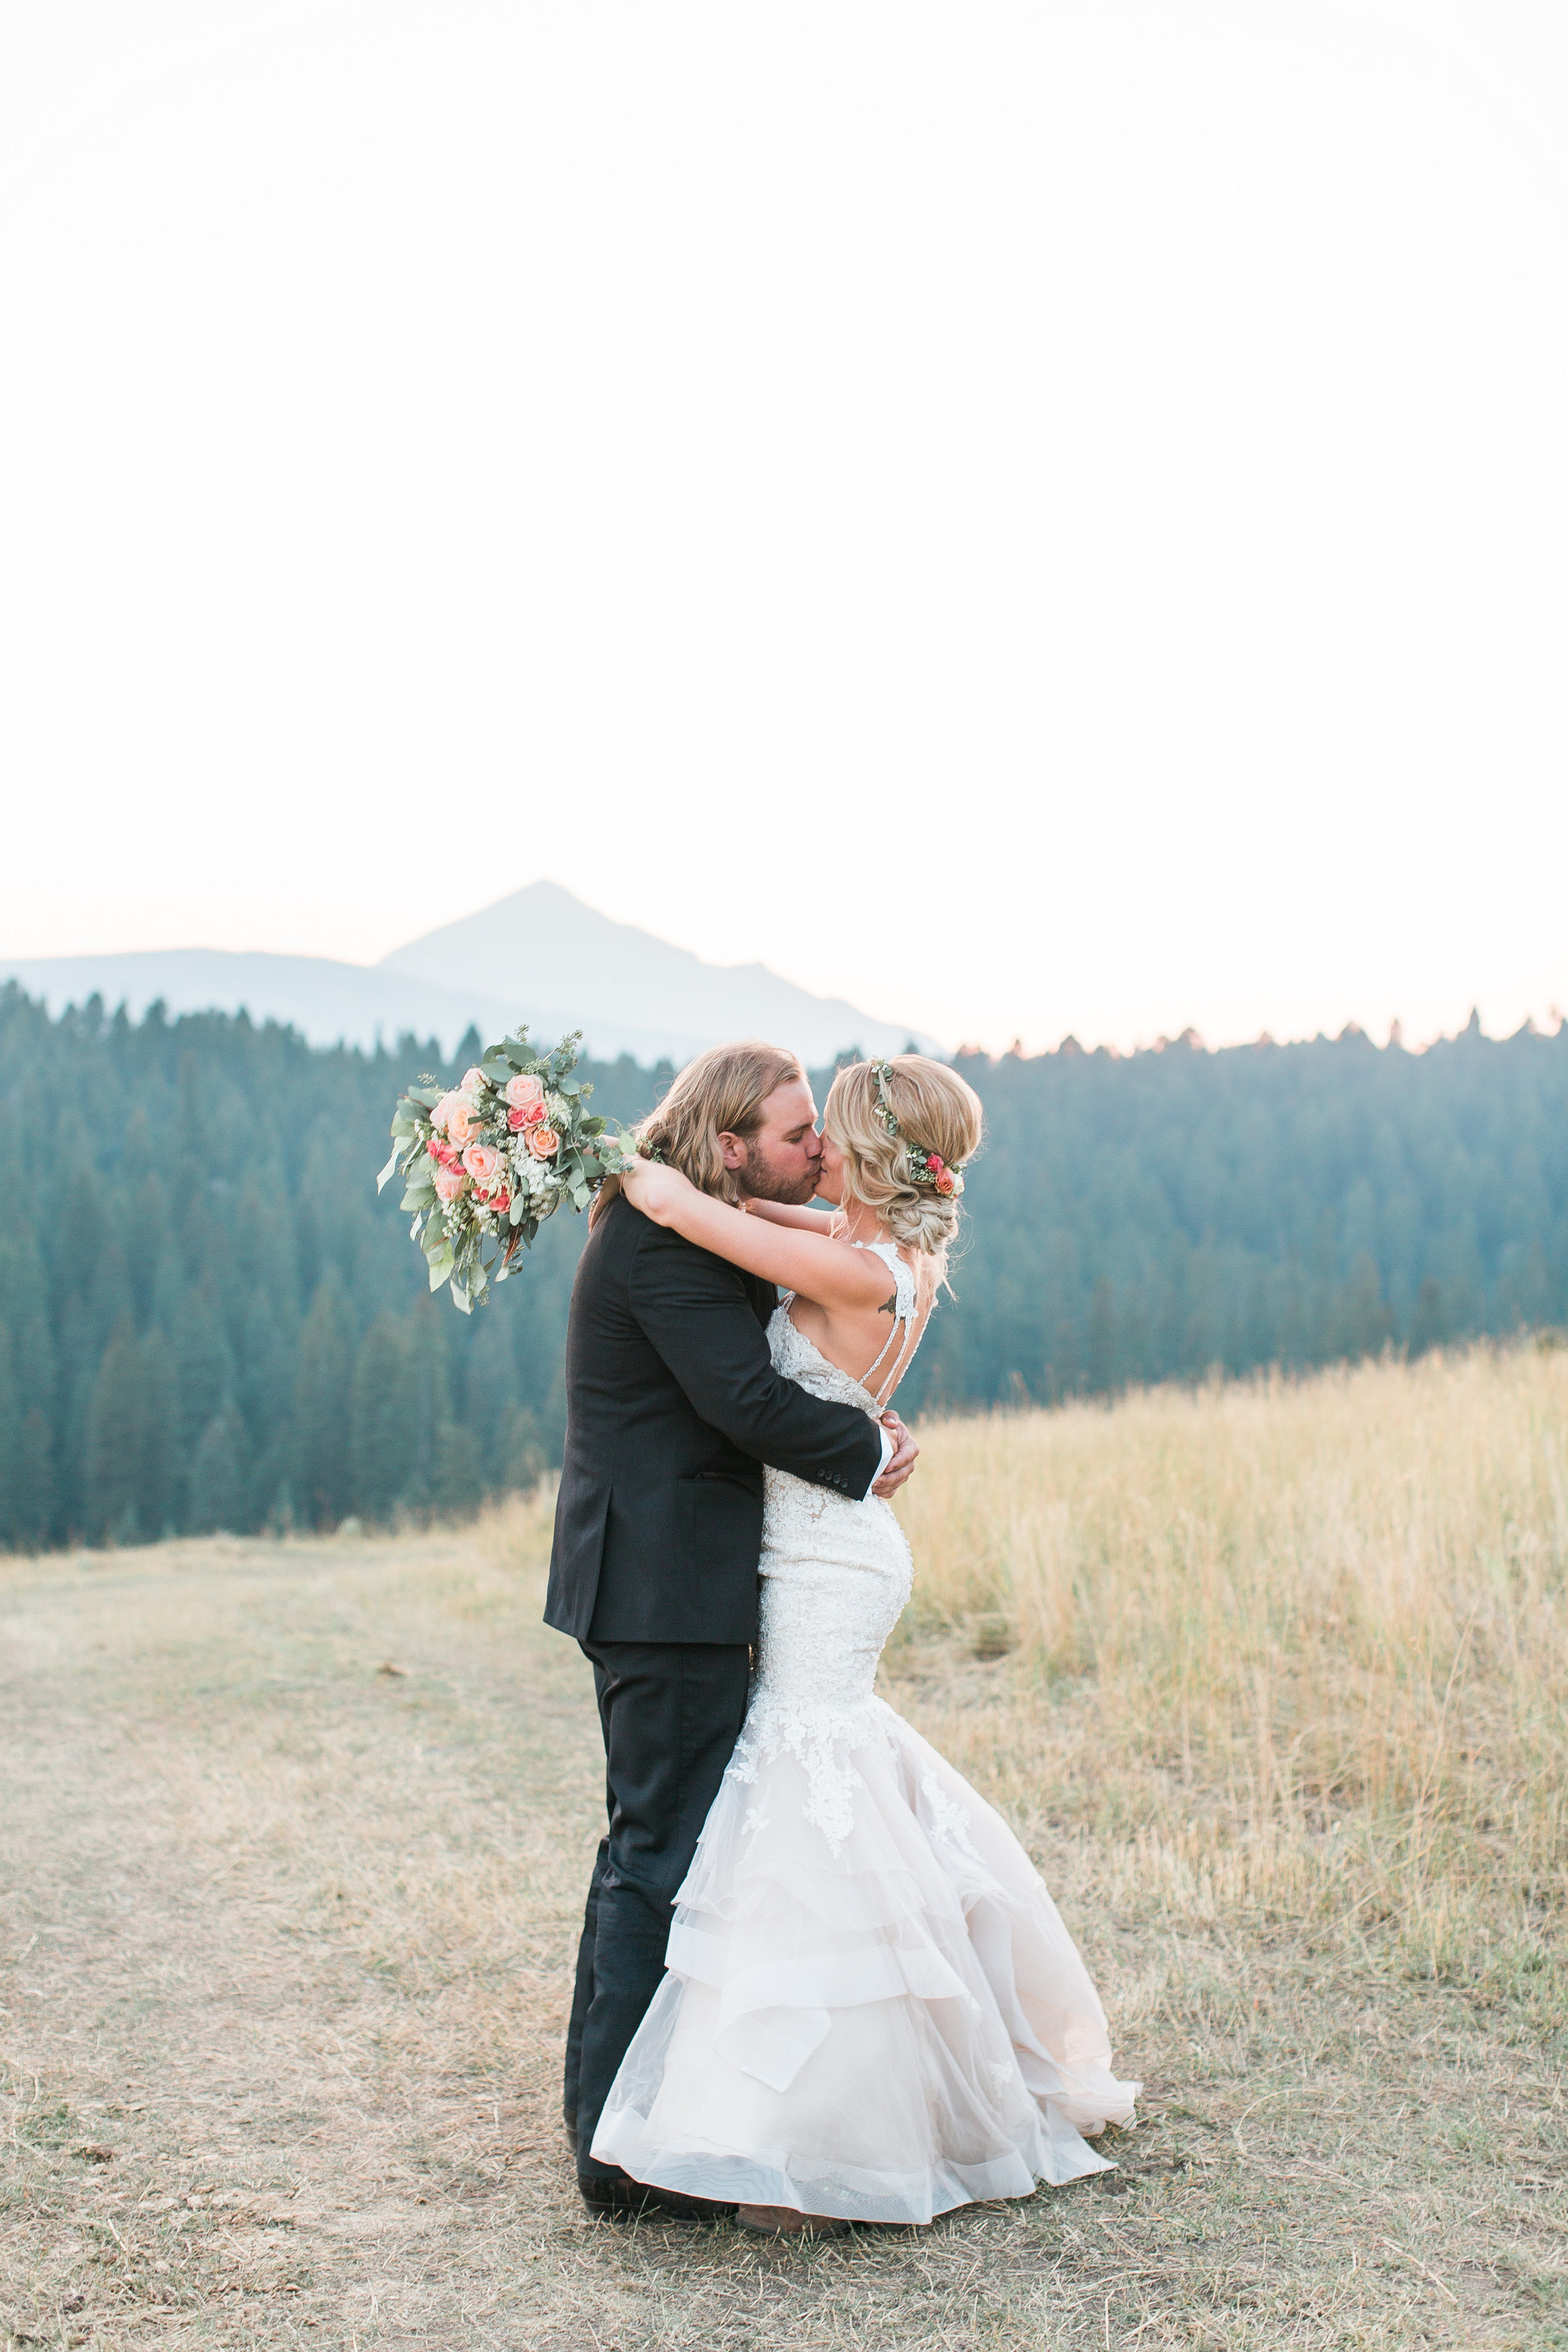 Boho bride and groom kissing with mountains in the background in Big Sky Montana Lone Mountain Ranch wedding Minnesota wedding photography Mallory Kiesow Photography